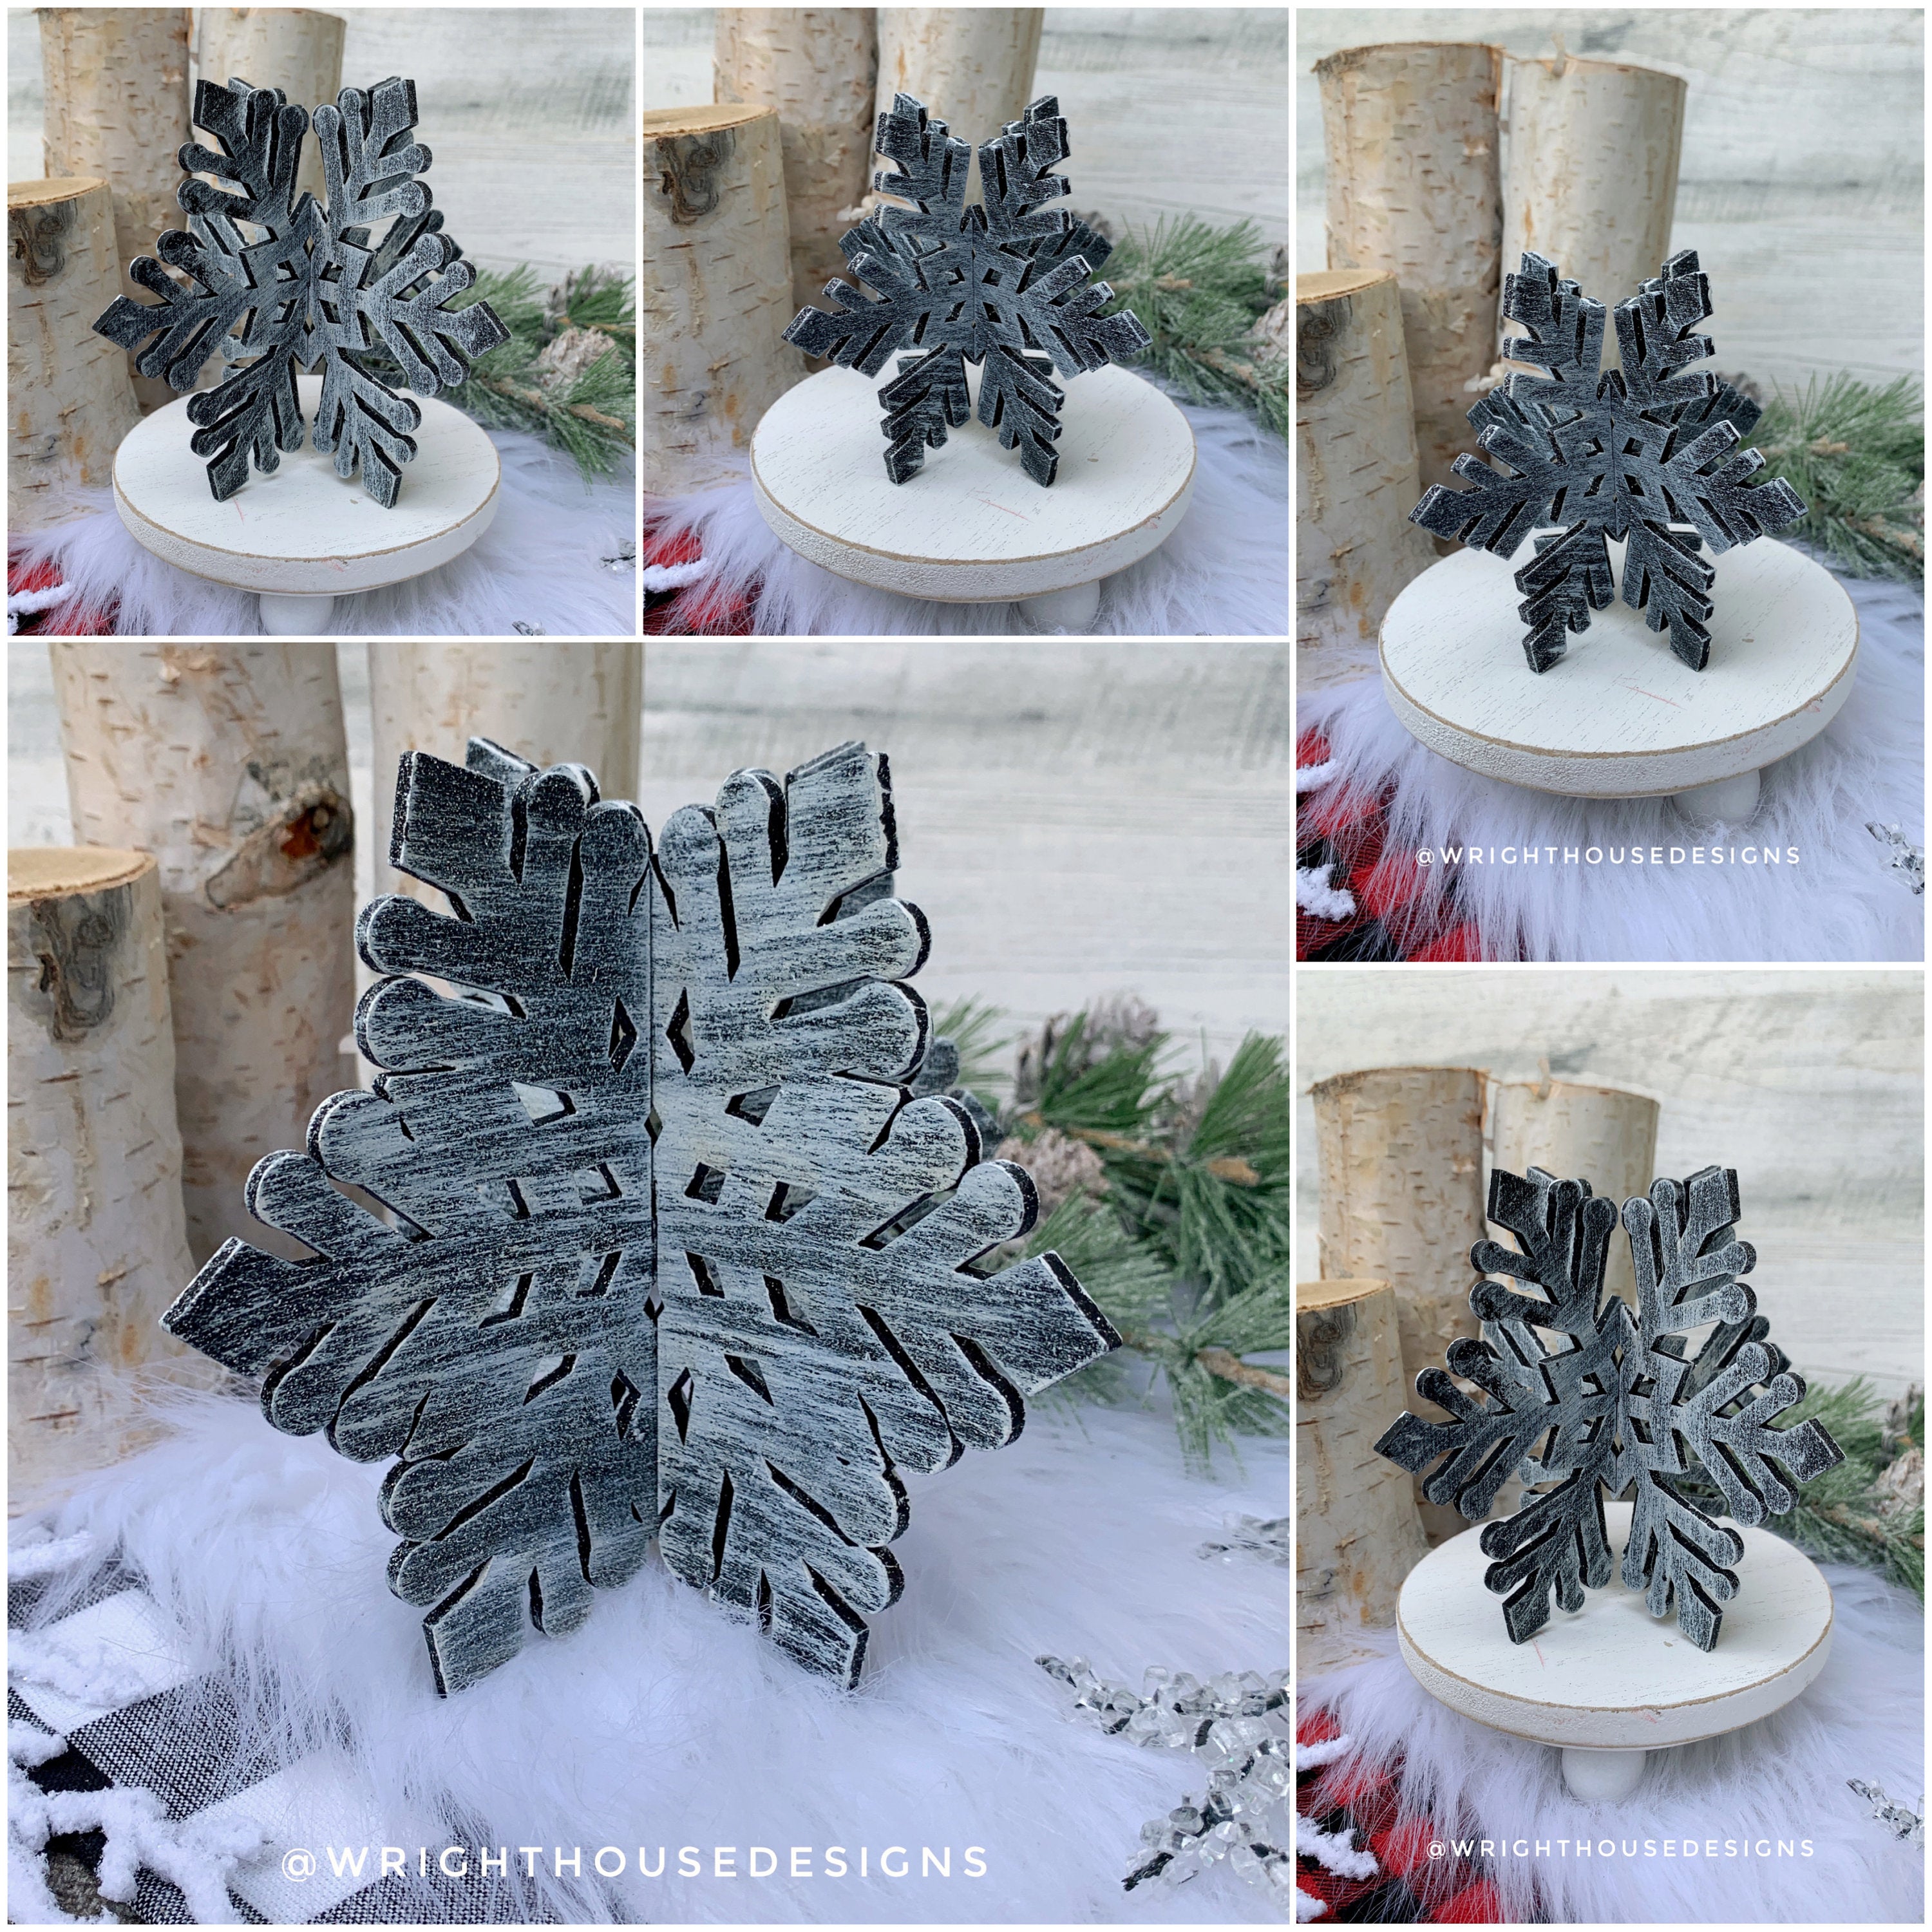 Winter 3D Interlocking Christmas Snowflakes - Rustic Farmhouse - Laser Cut Wooden Holiday Decor - Fireplace Mantle -Winter Shelf Sitters